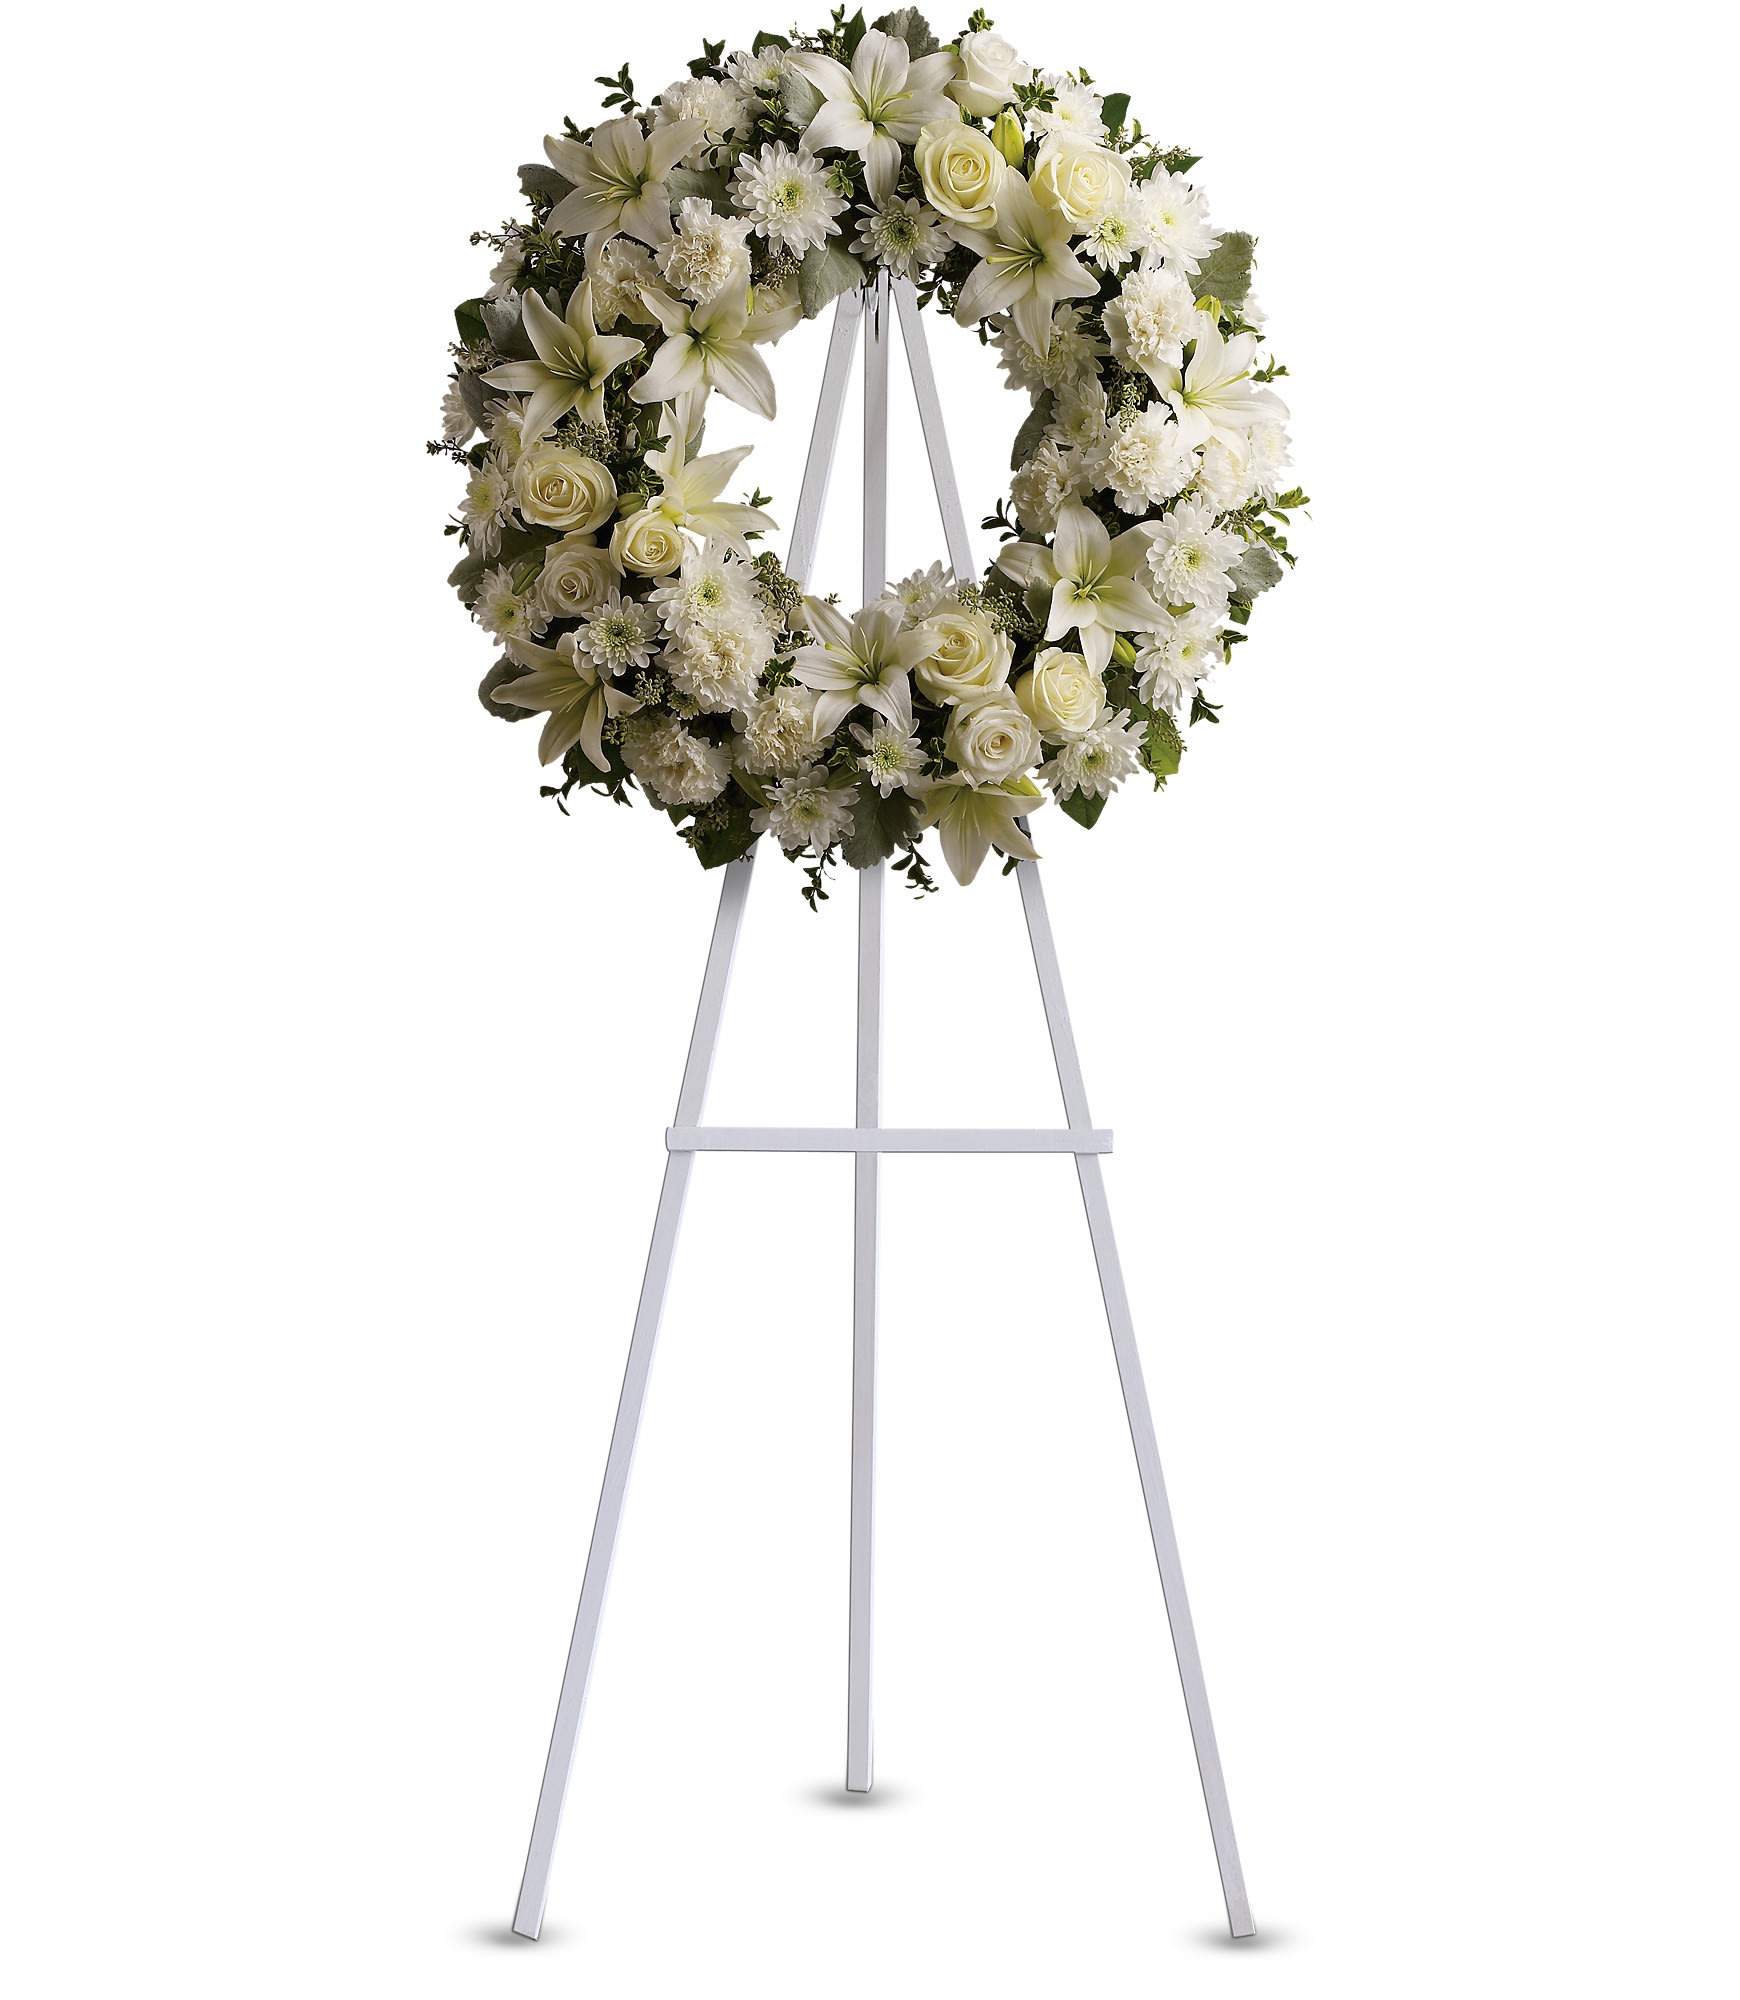 Serenity Wreath - A ring of fragrant, bright white blossoms will create a serene display at any funeral or wake. This classic wreath is delivered on an easel, and is a thoughtful expression of sympathy and admiration. T239-3A 